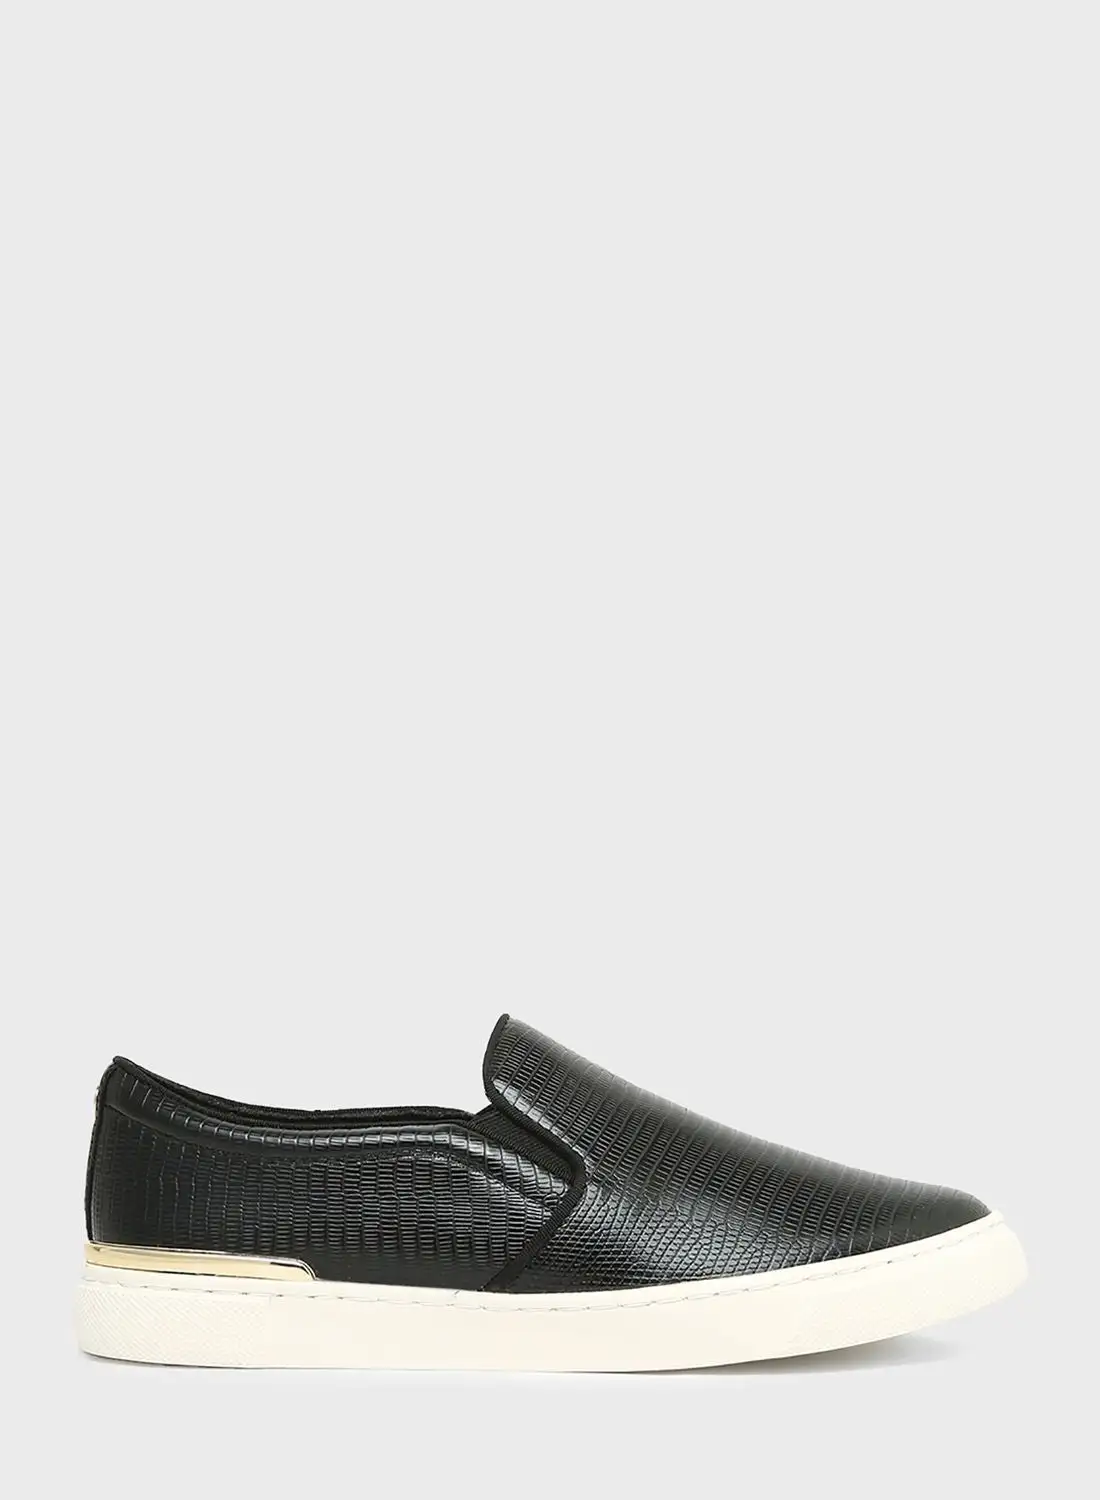 ALDO Textured Faux Leather Slip-Ons